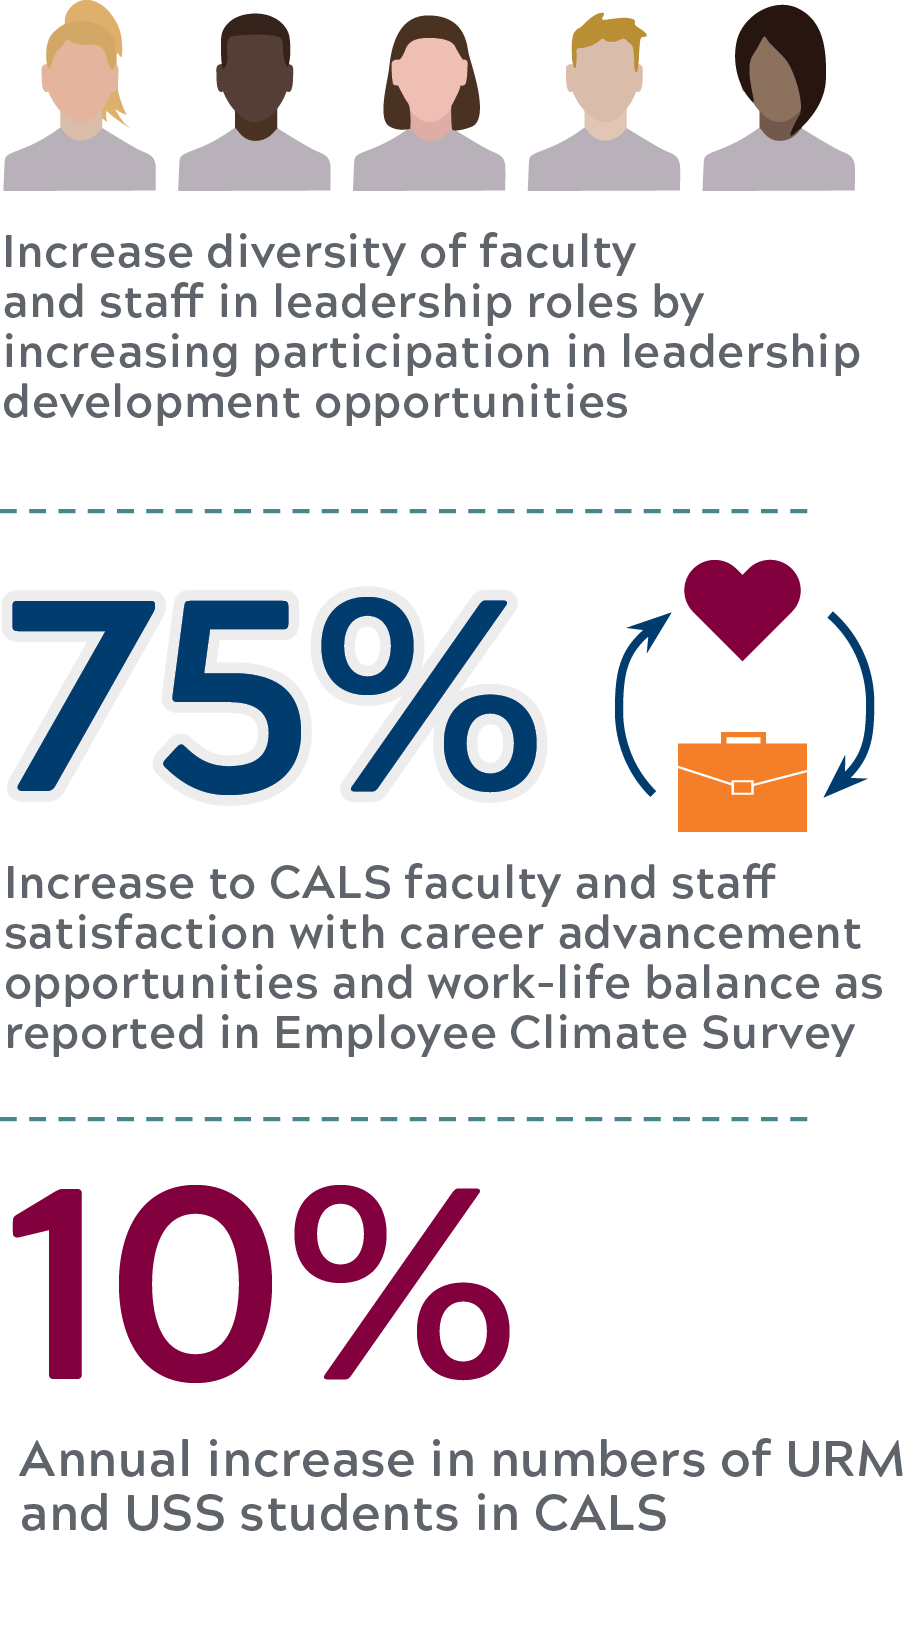 Increase diversity of faculty and staff in leadership roles by increasing participation in leadership development opportunities. 75% increase to CALS and staff satisfaction with career advancement opportunities and work-life balance as reported in Employee Climate Survey. 10% annual increase in numbers of URM and USS students in CALS.